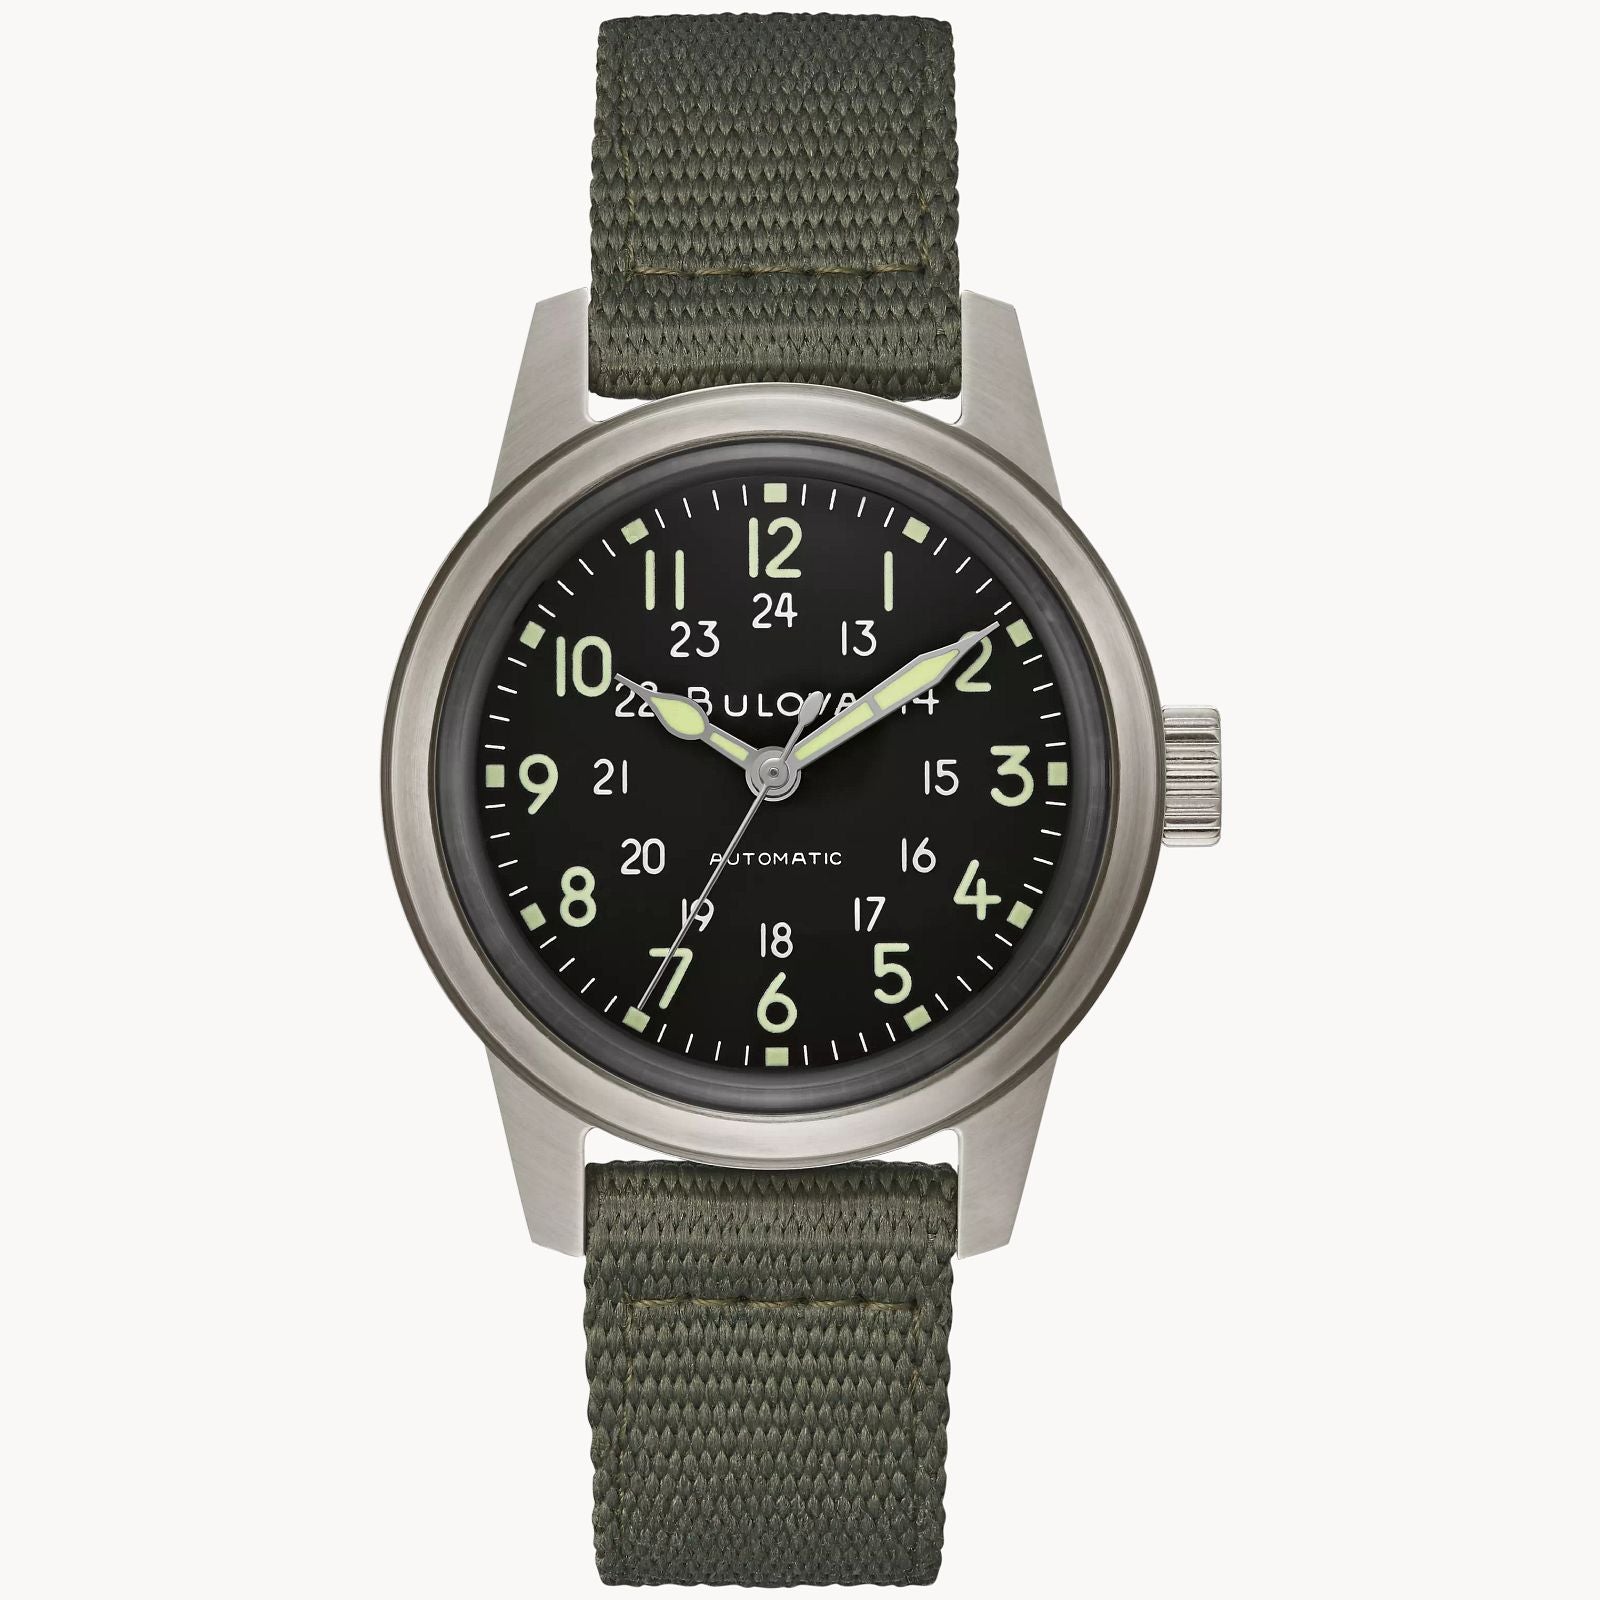 Bulova Military Heritage Hack Watch VWI Special Edition